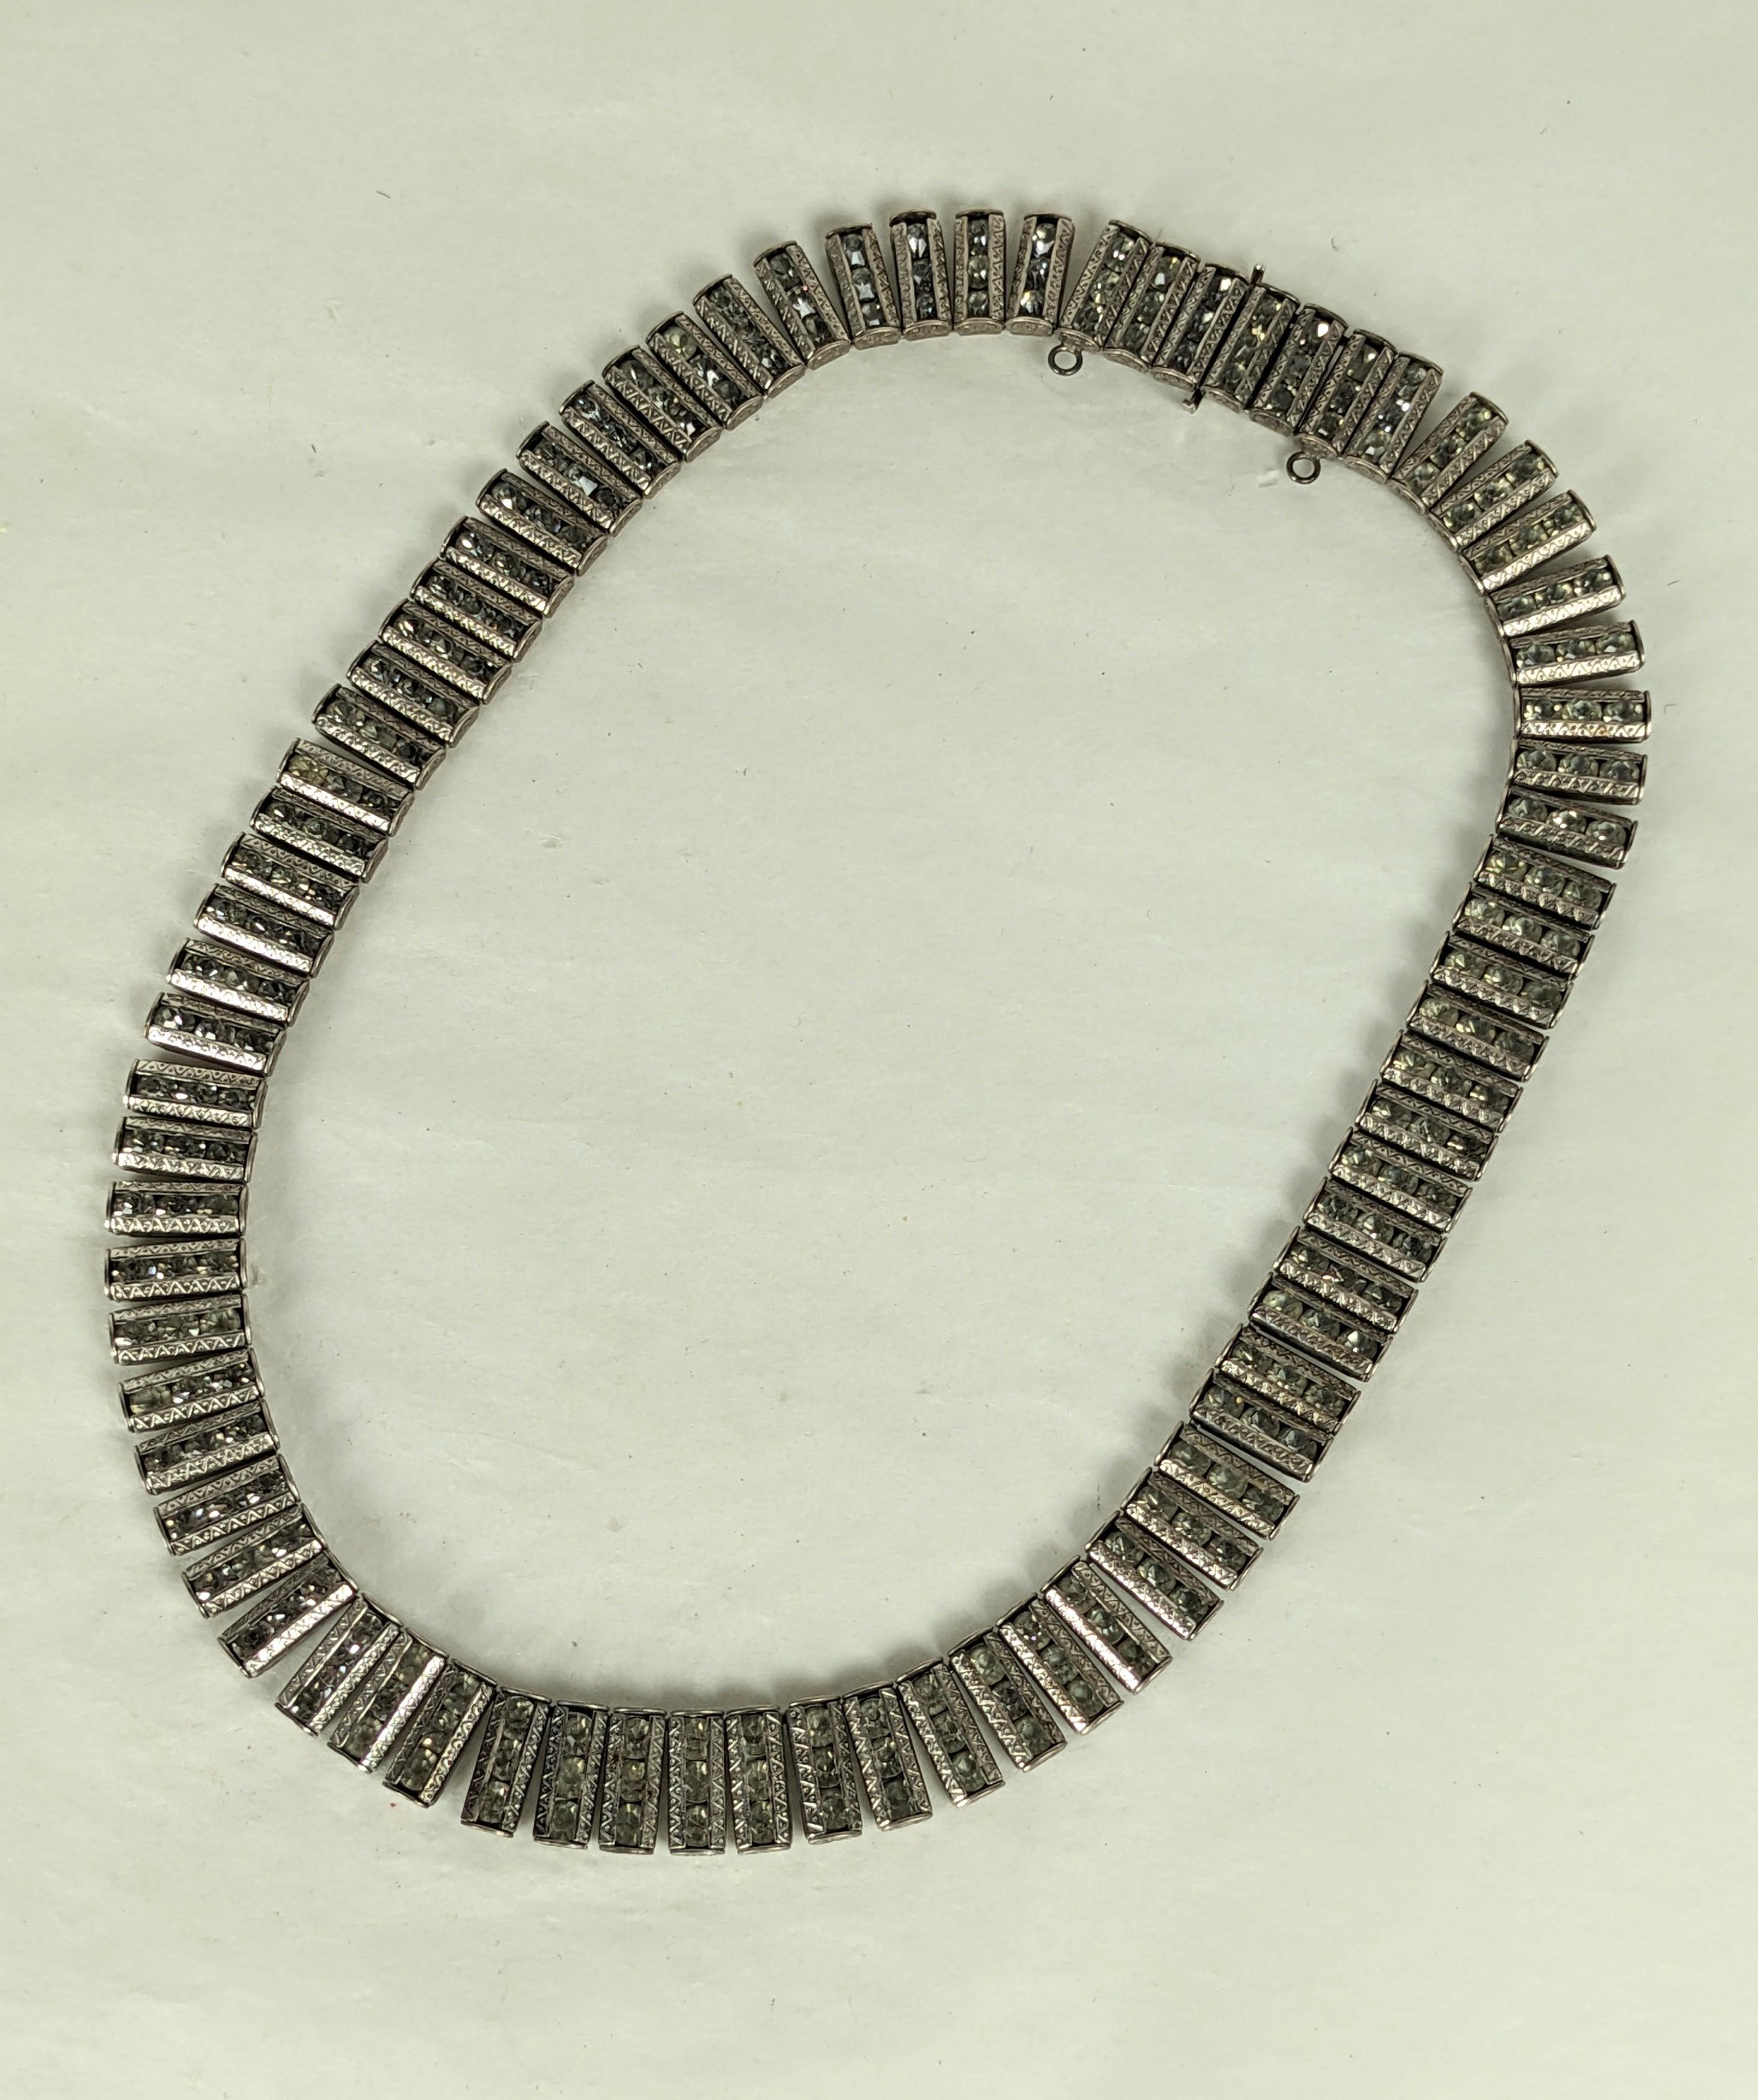 Art Deco Machine Age Sterling articulated necklace of channel set round crystal paste pave links set in rhodium plate sterling silver. Each incised with geometric art deco designs. Clasp closure with safety. 
Excellent Condition. 1920's USA. Signed